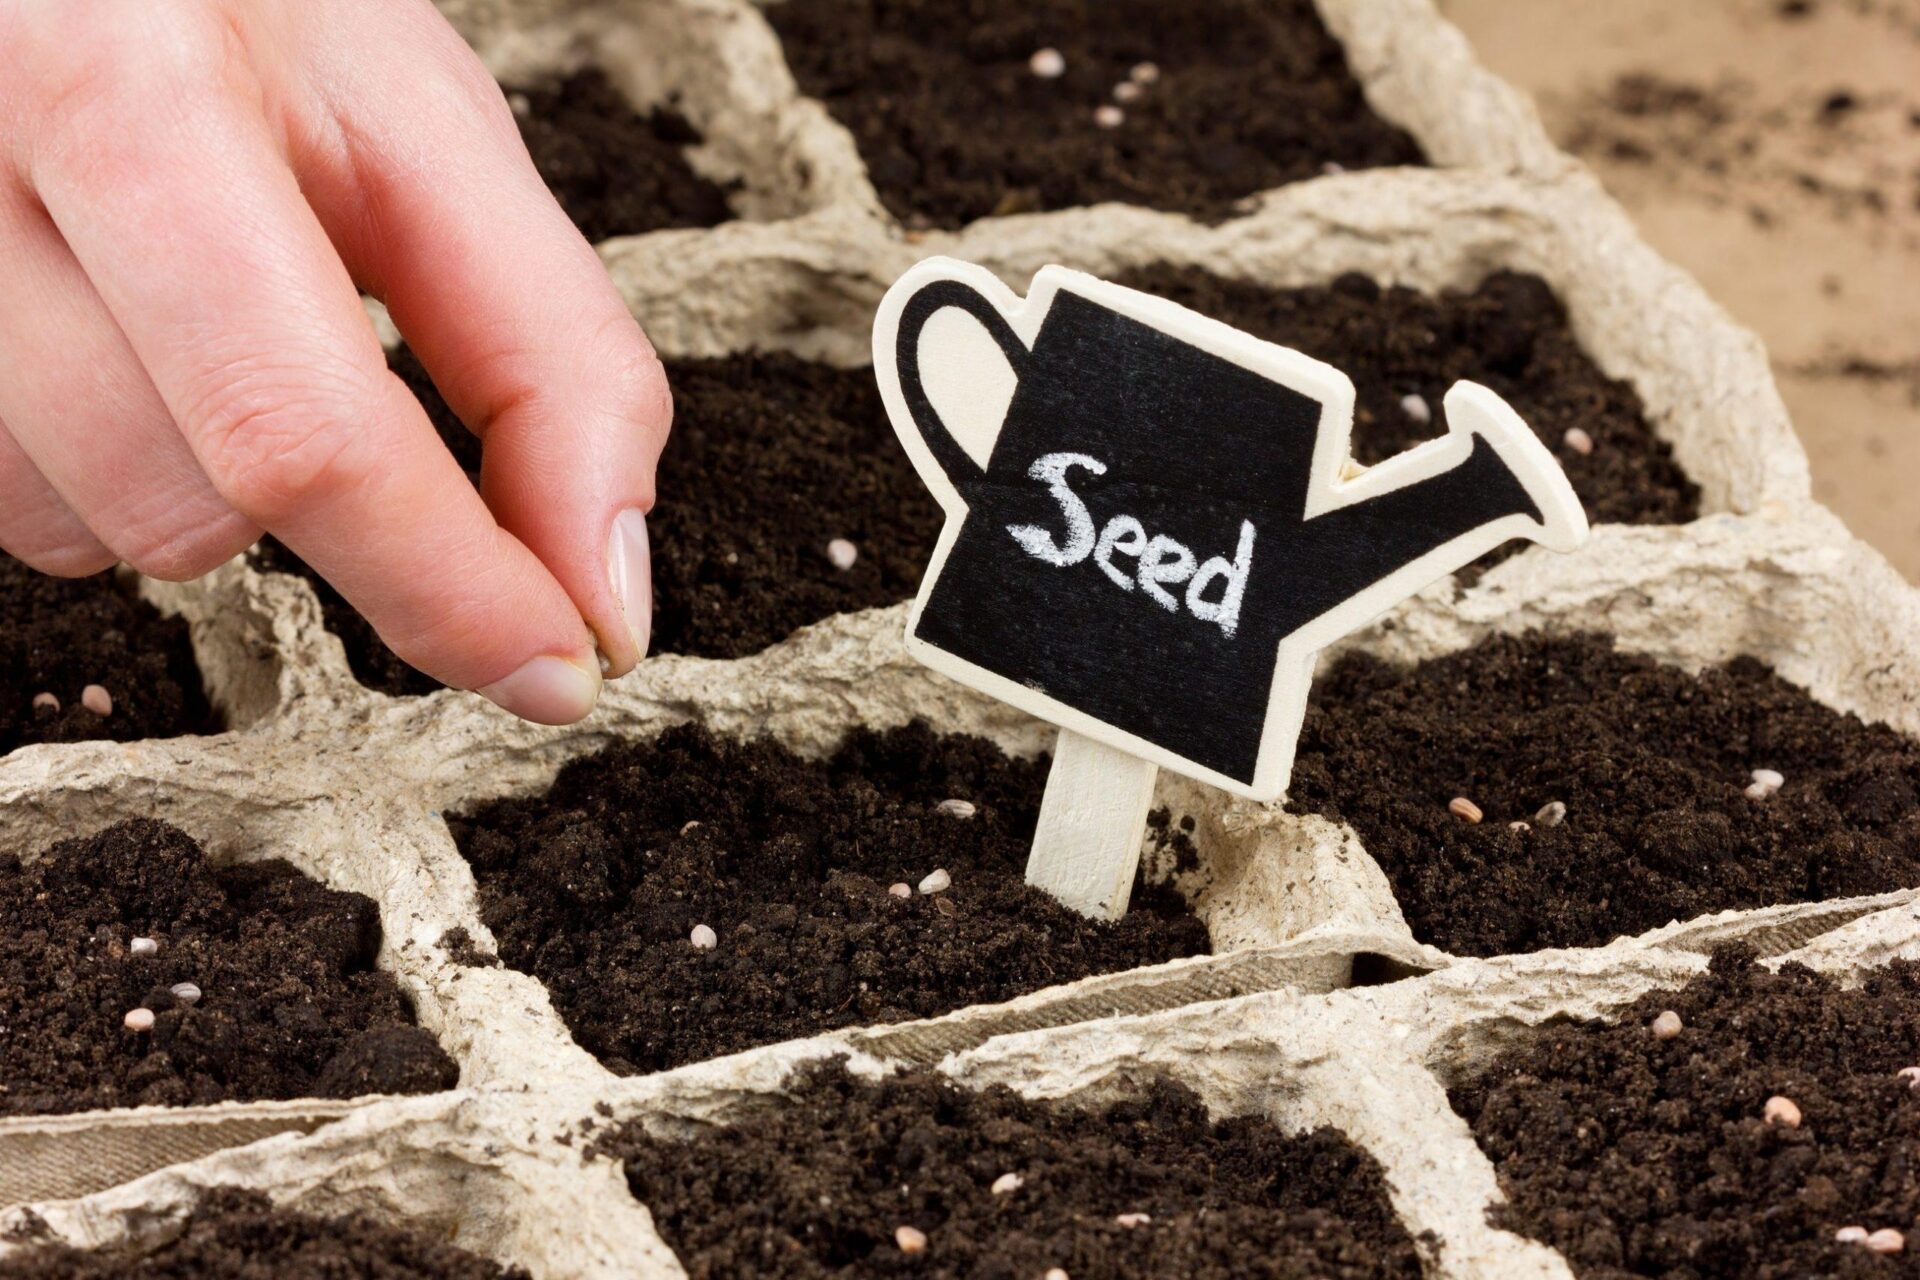 Borrow, Grow and Return: It’s Thyme to Join the Seed Library